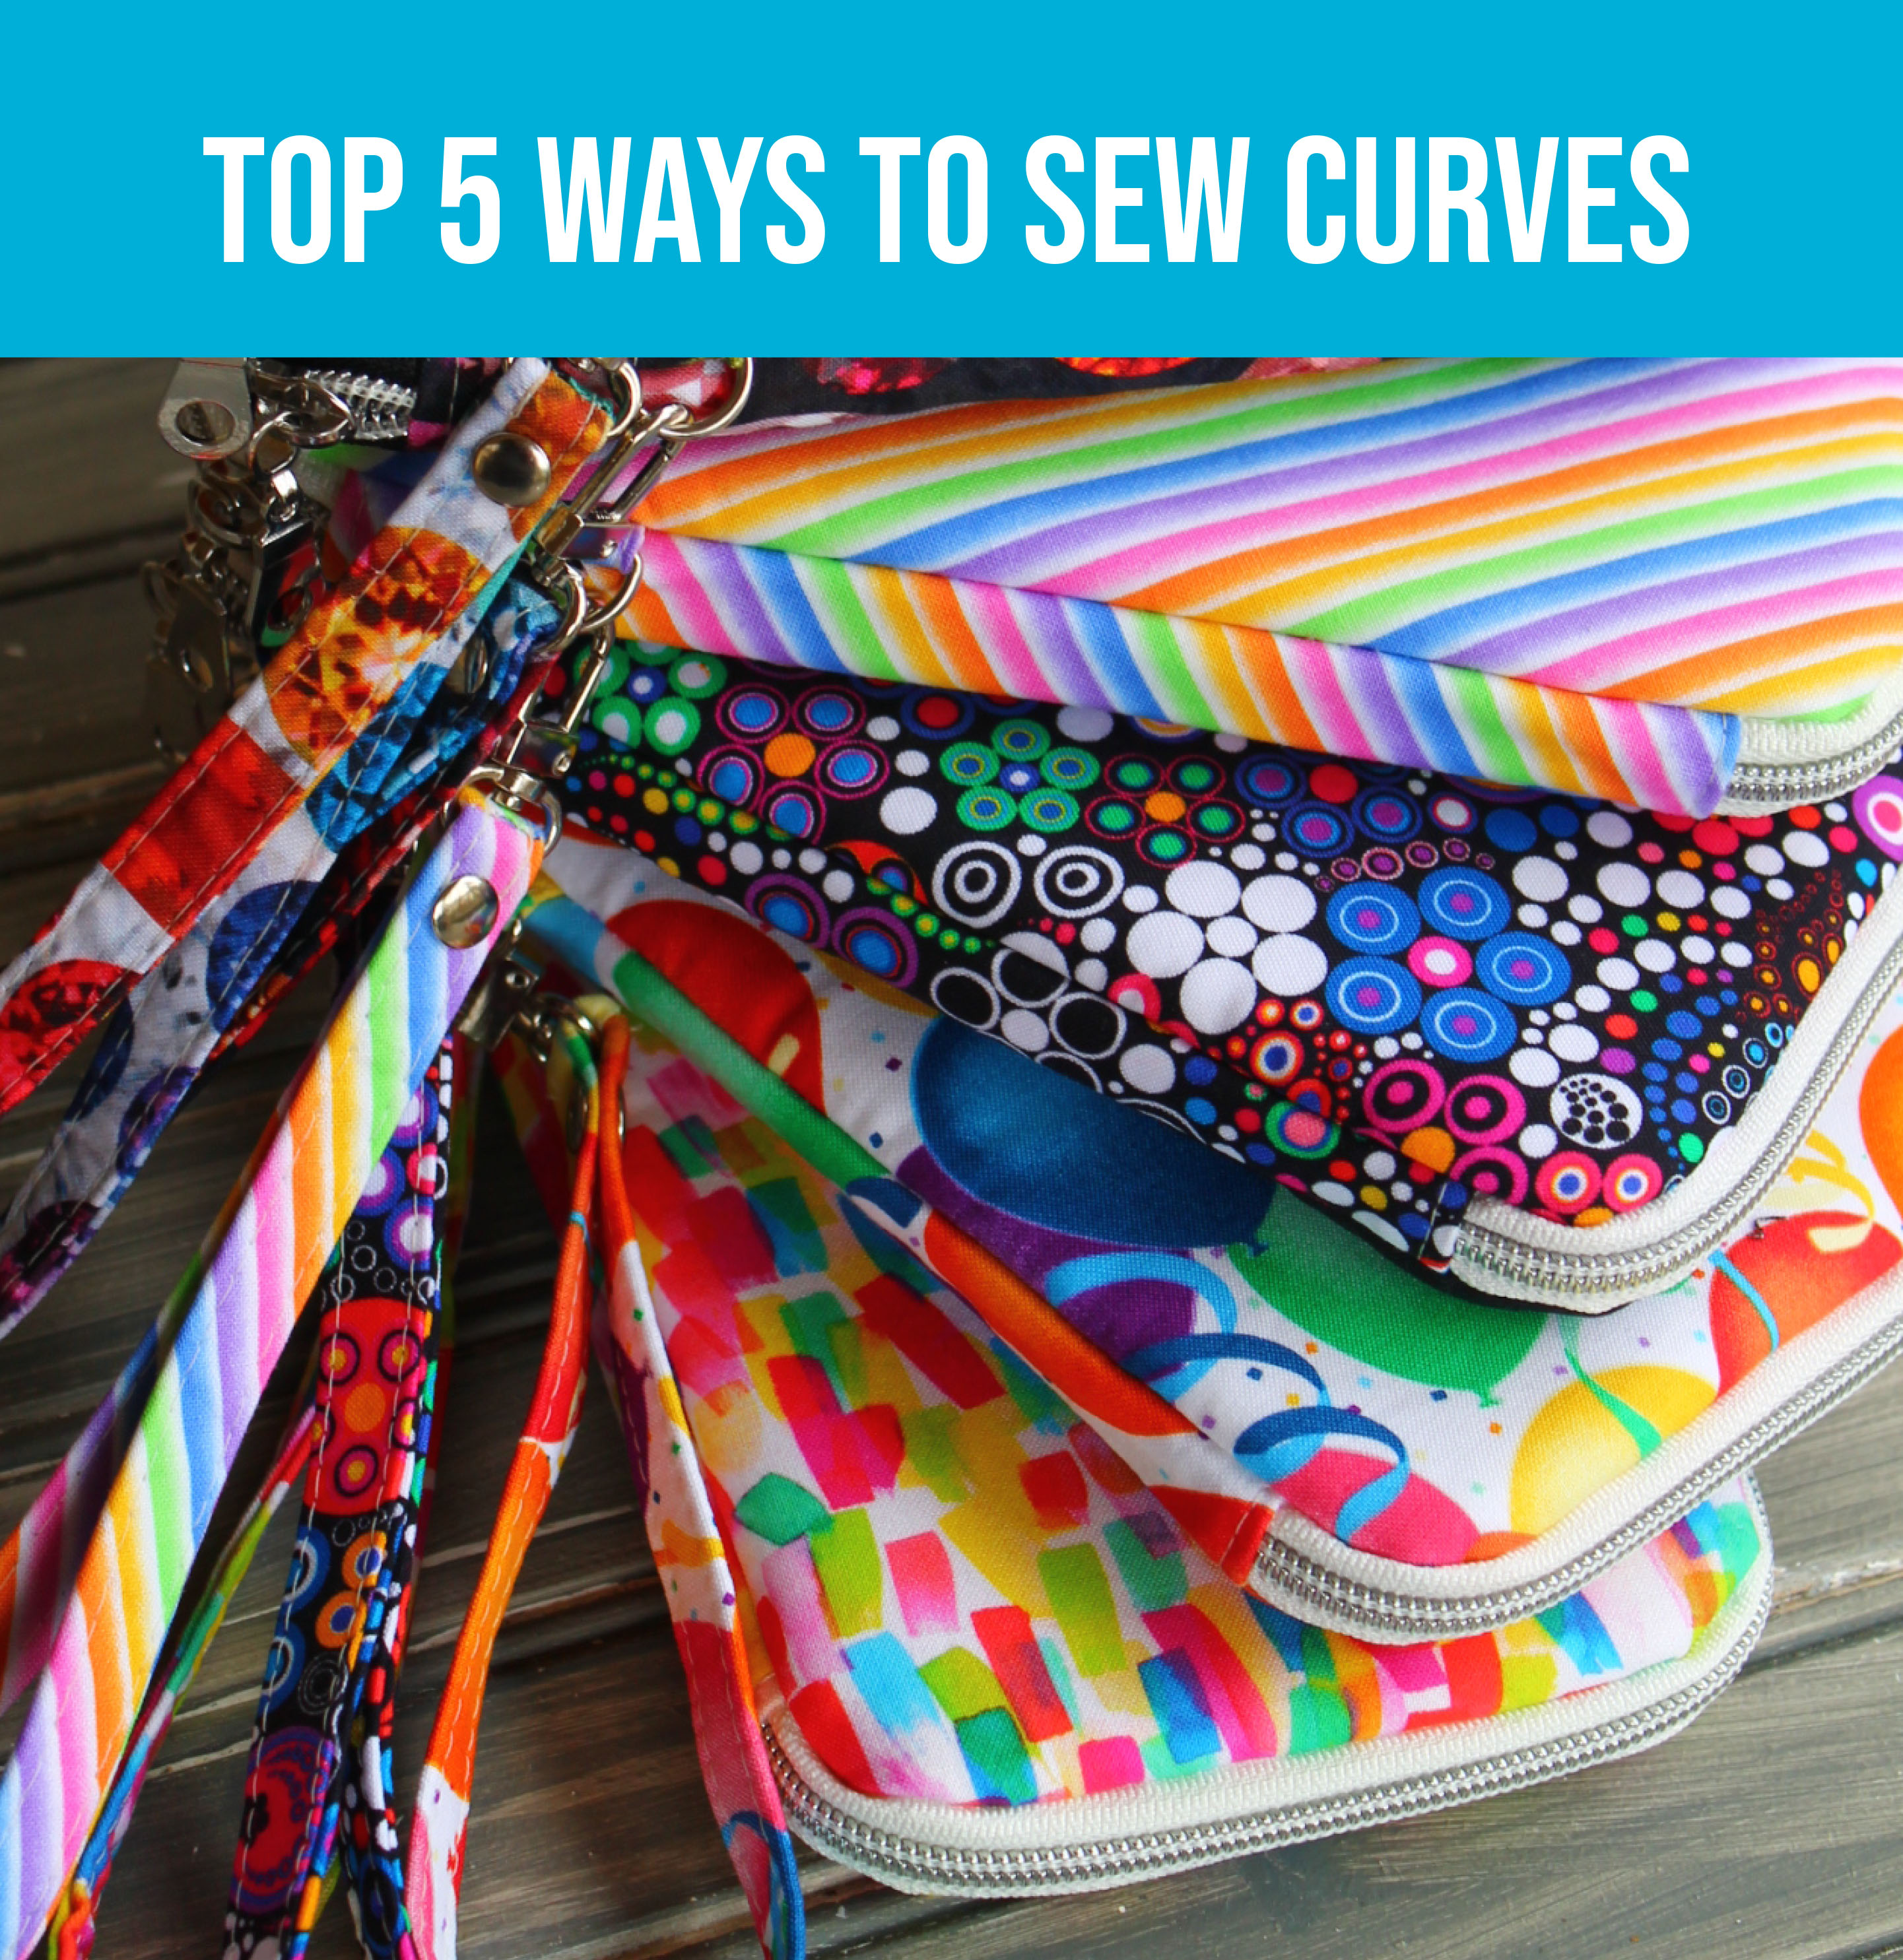 VIDEO: Top 5 Tips for Sewing Curves